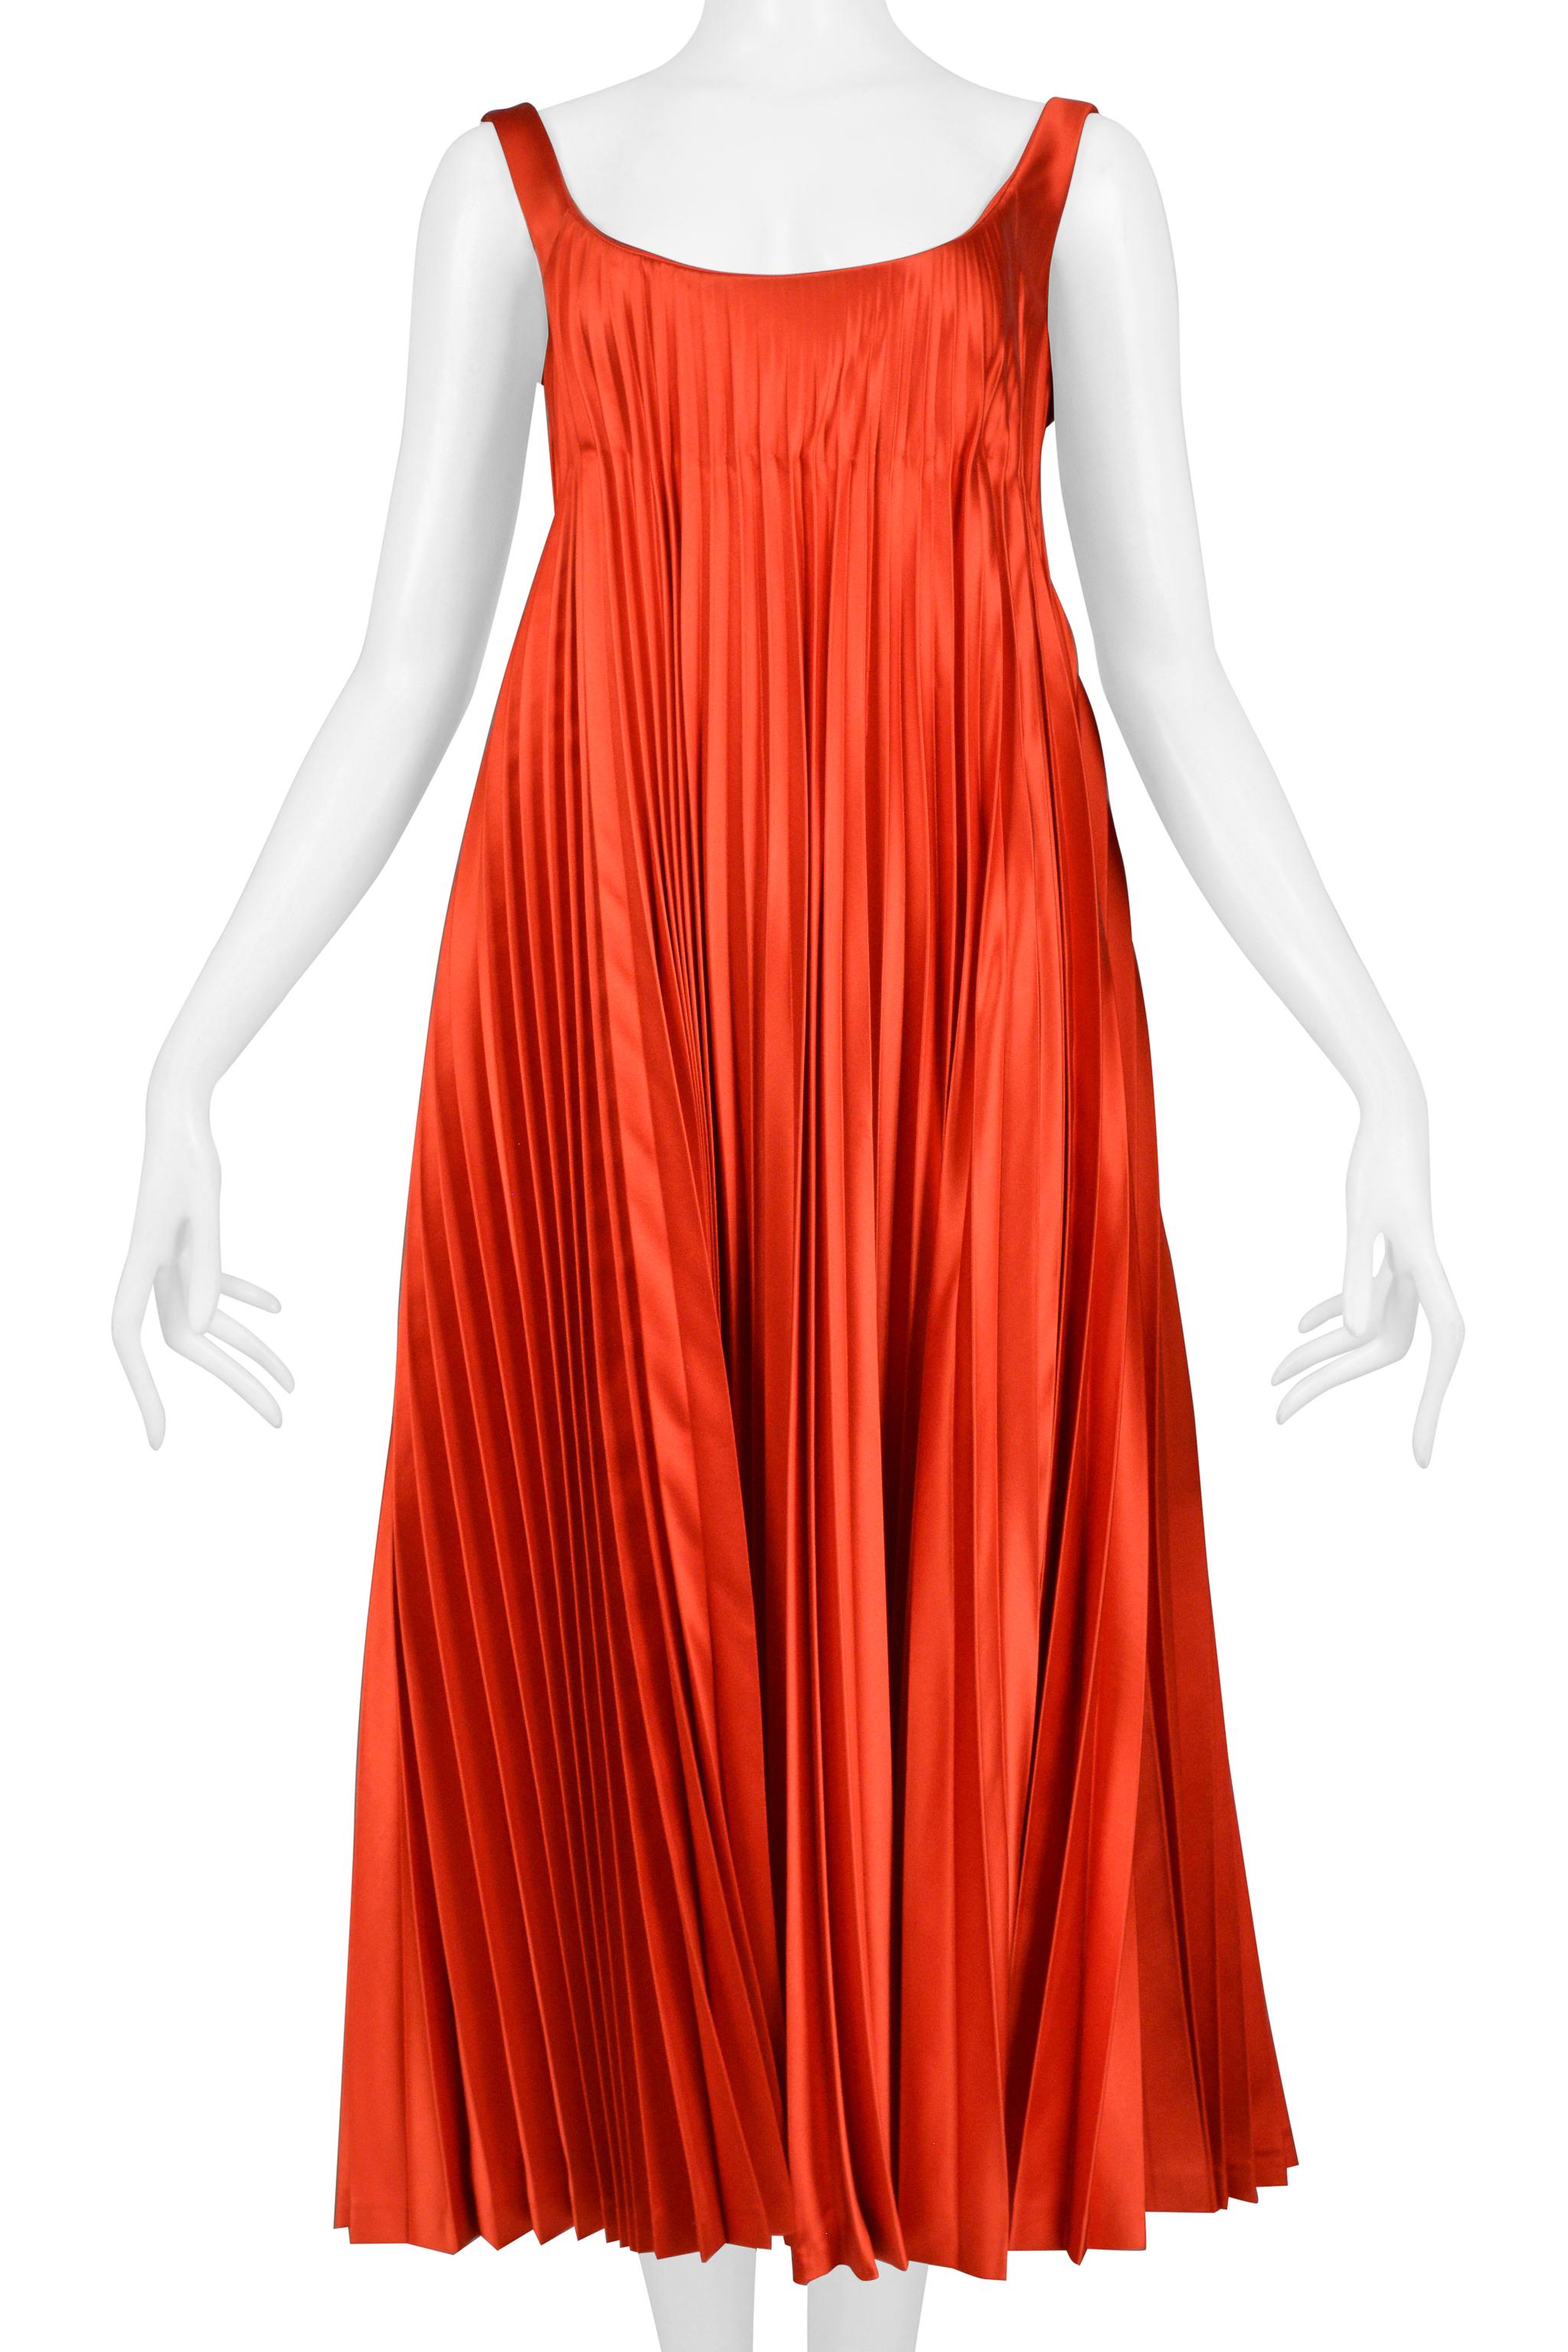 Alexander McQueen Red Satin Pleated Cocktail Dress 2003 In Excellent Condition For Sale In Los Angeles, CA